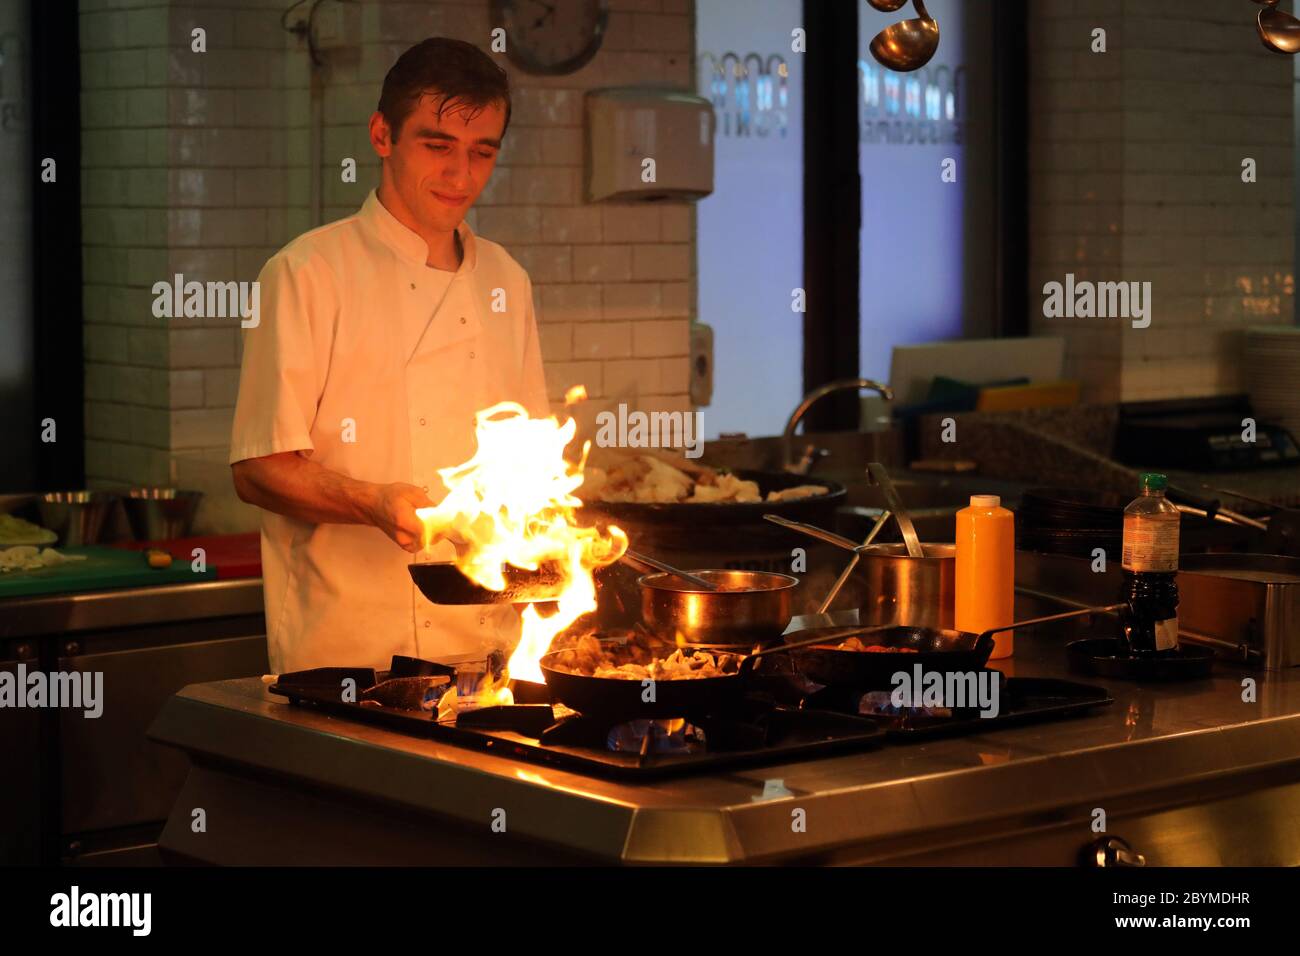 20.07.2018, Tbilisi, , Georgia - Cook flambing food in a pan. 00S180720D073CAROEX.JPG [MODEL RELEASE: NO, PROPERTY RELEASE: NO (c) caro images / Sorg Stock Photo